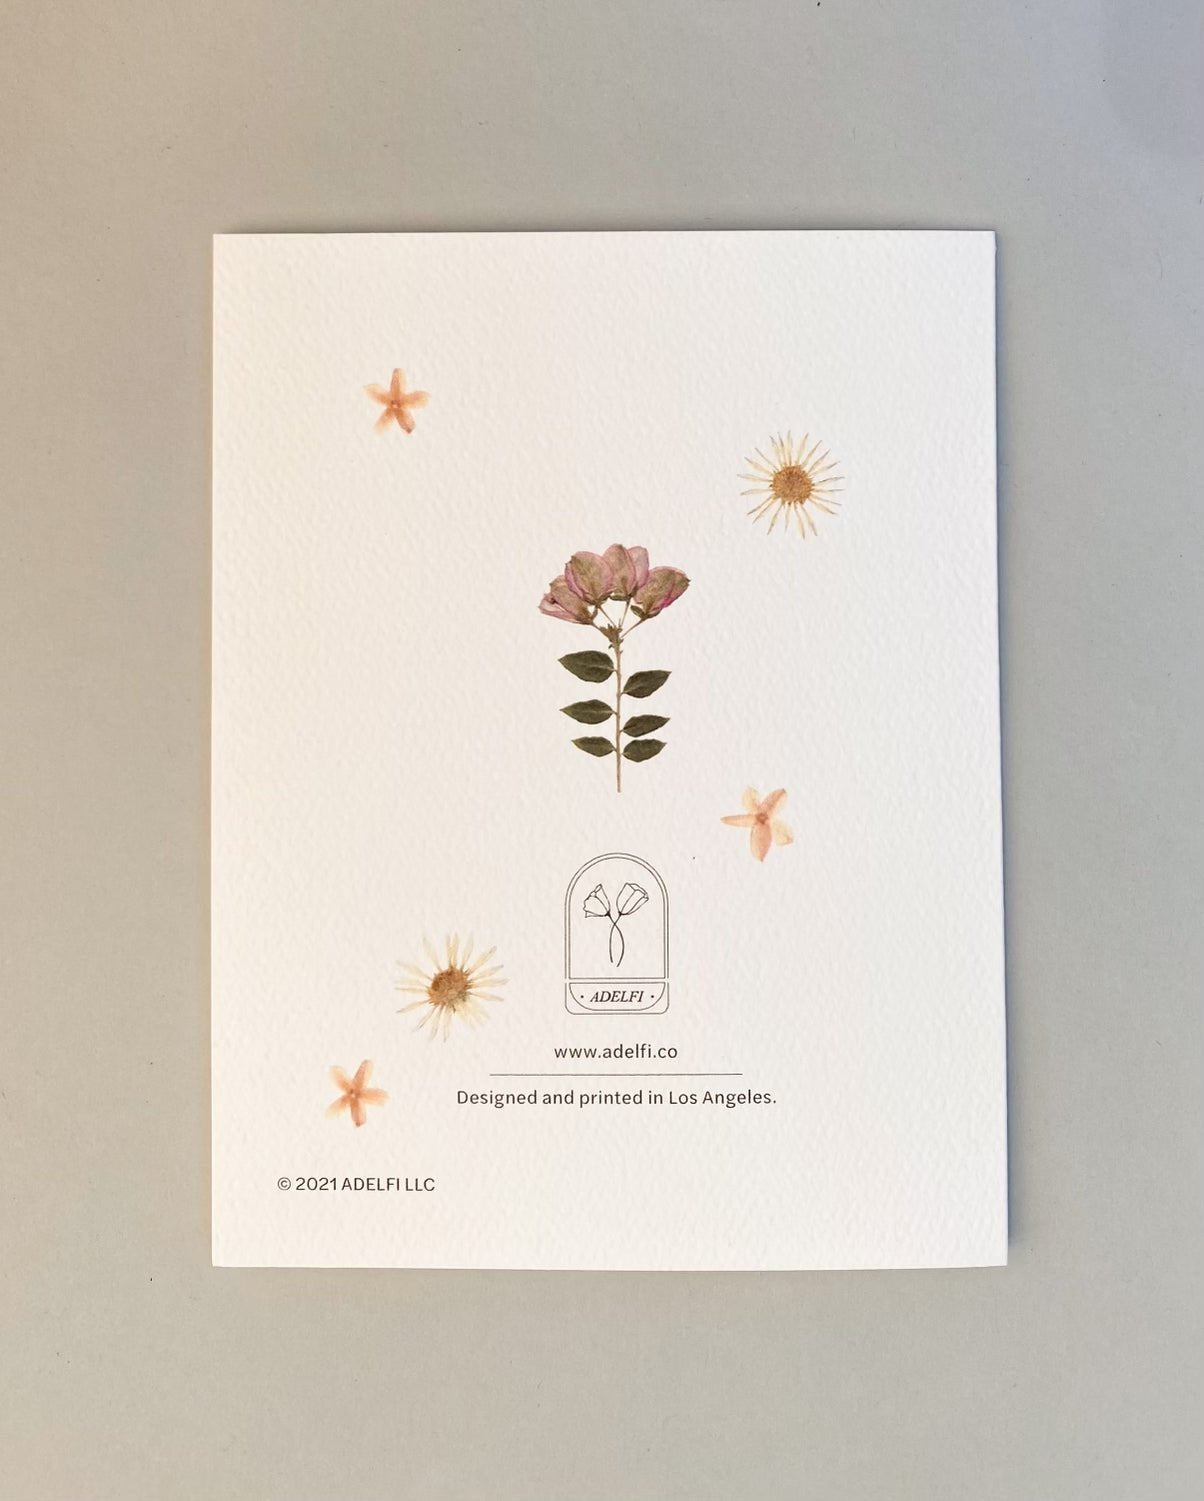 The back of the Adelfi "Congratulations" card with the brand logo and a few scattered pressed flowers.